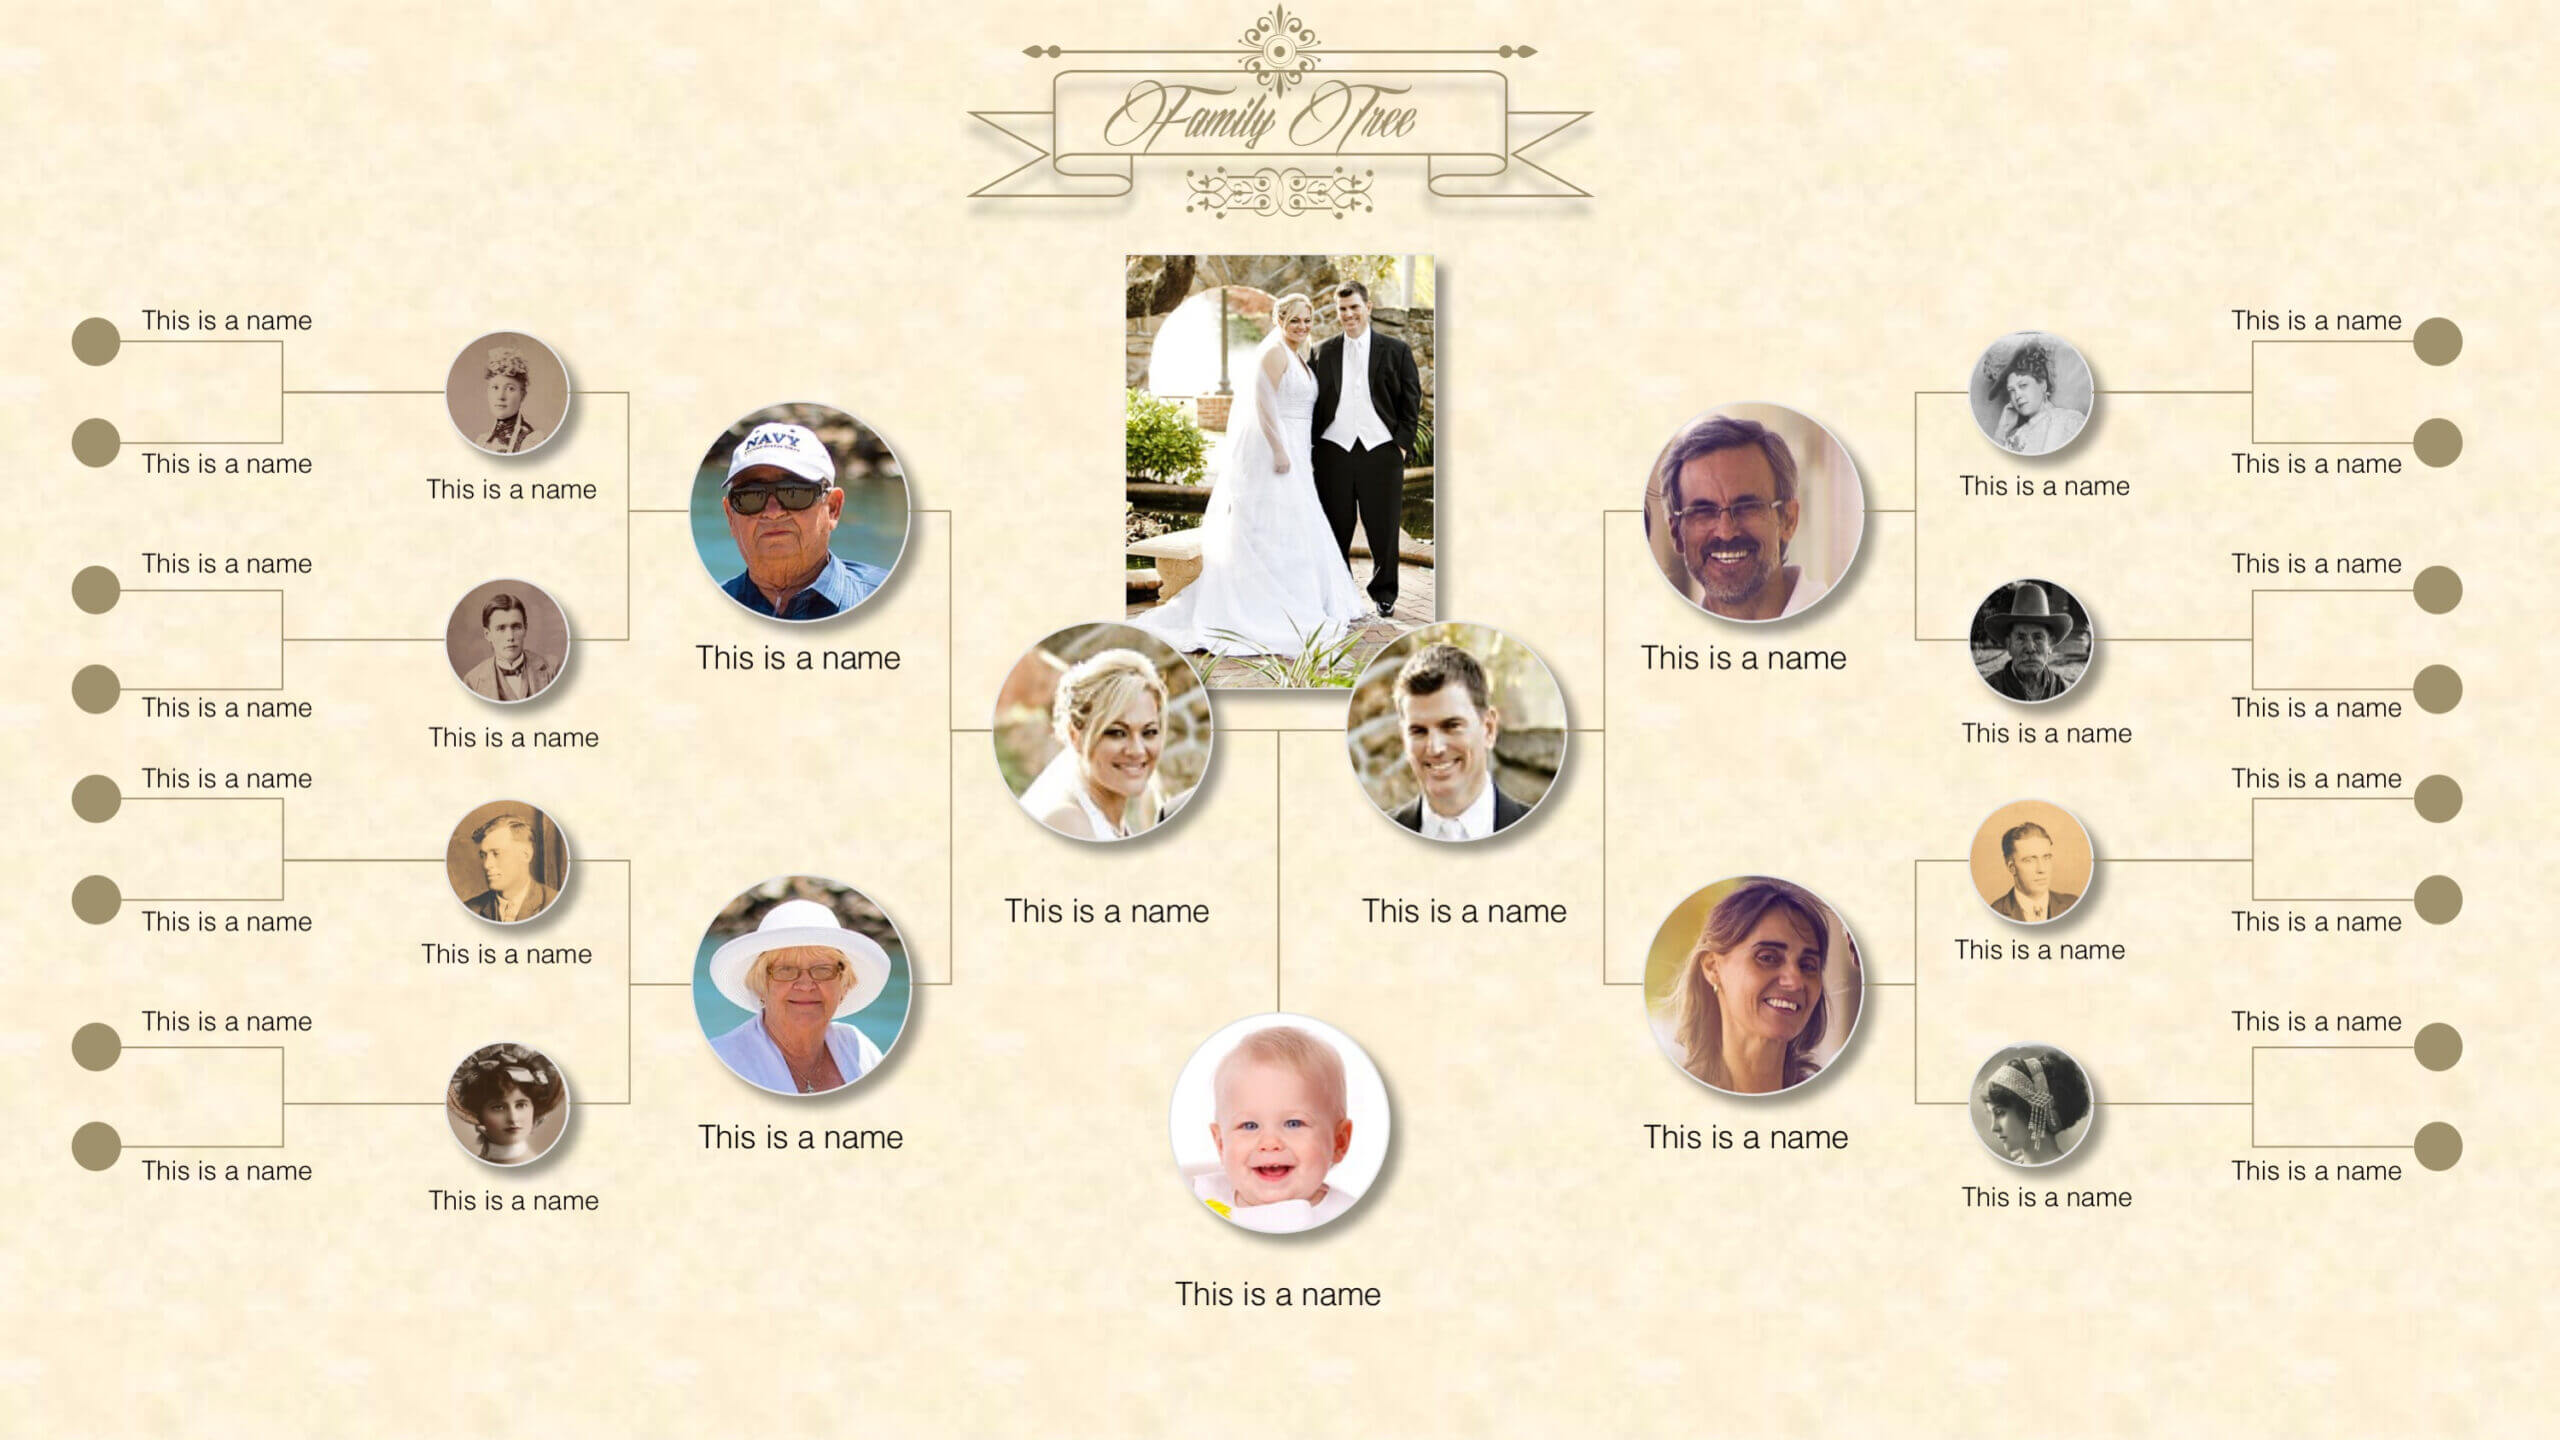 Family Tree Powerpoint Templates Intended For Powerpoint Genealogy Template